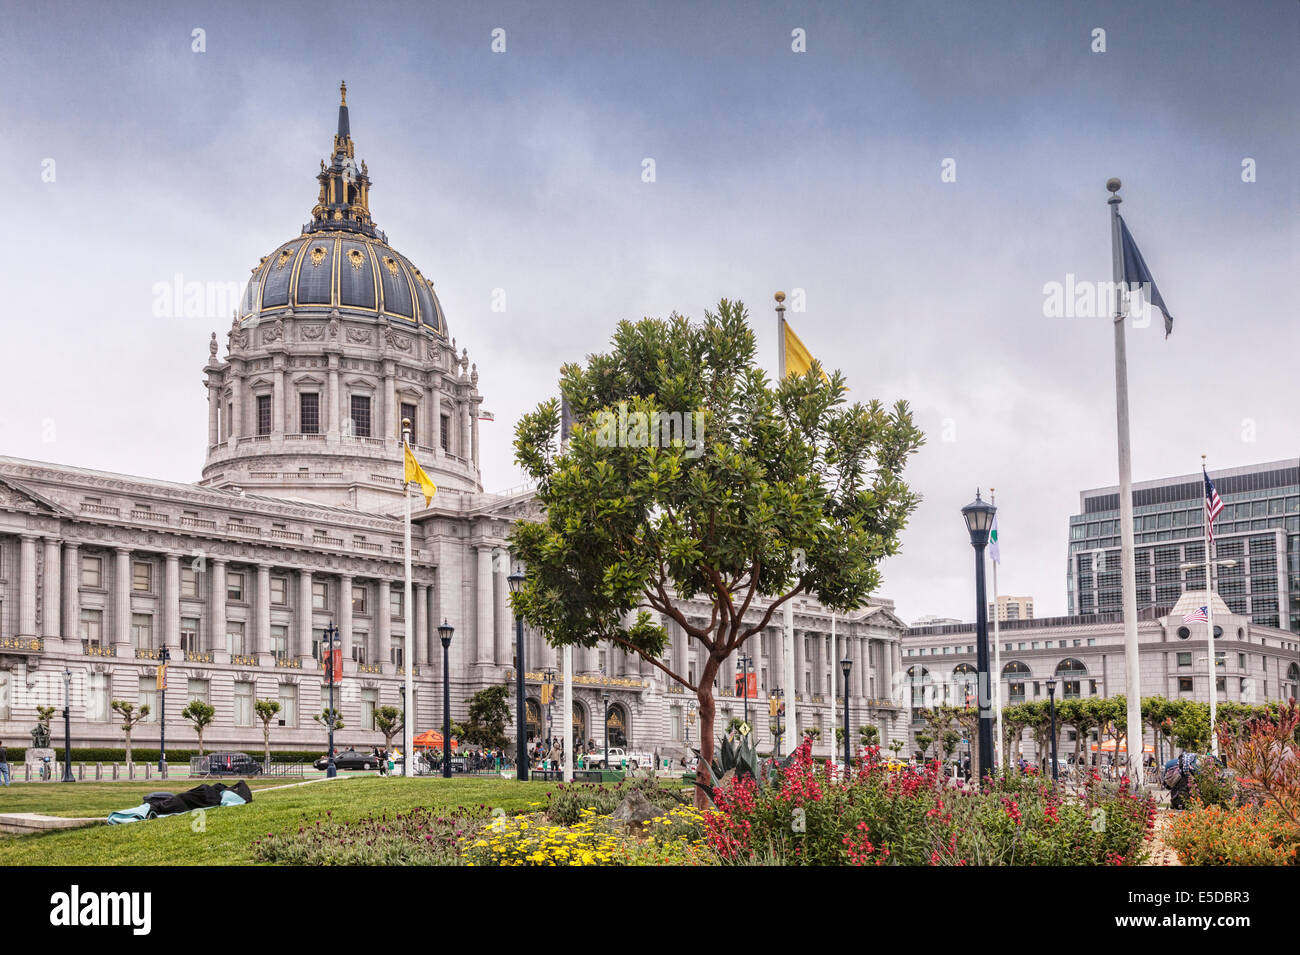 San Francisco City Hall, on a soft light day in Spring. A homeless person can be seen sleeping rough. Stock Photo